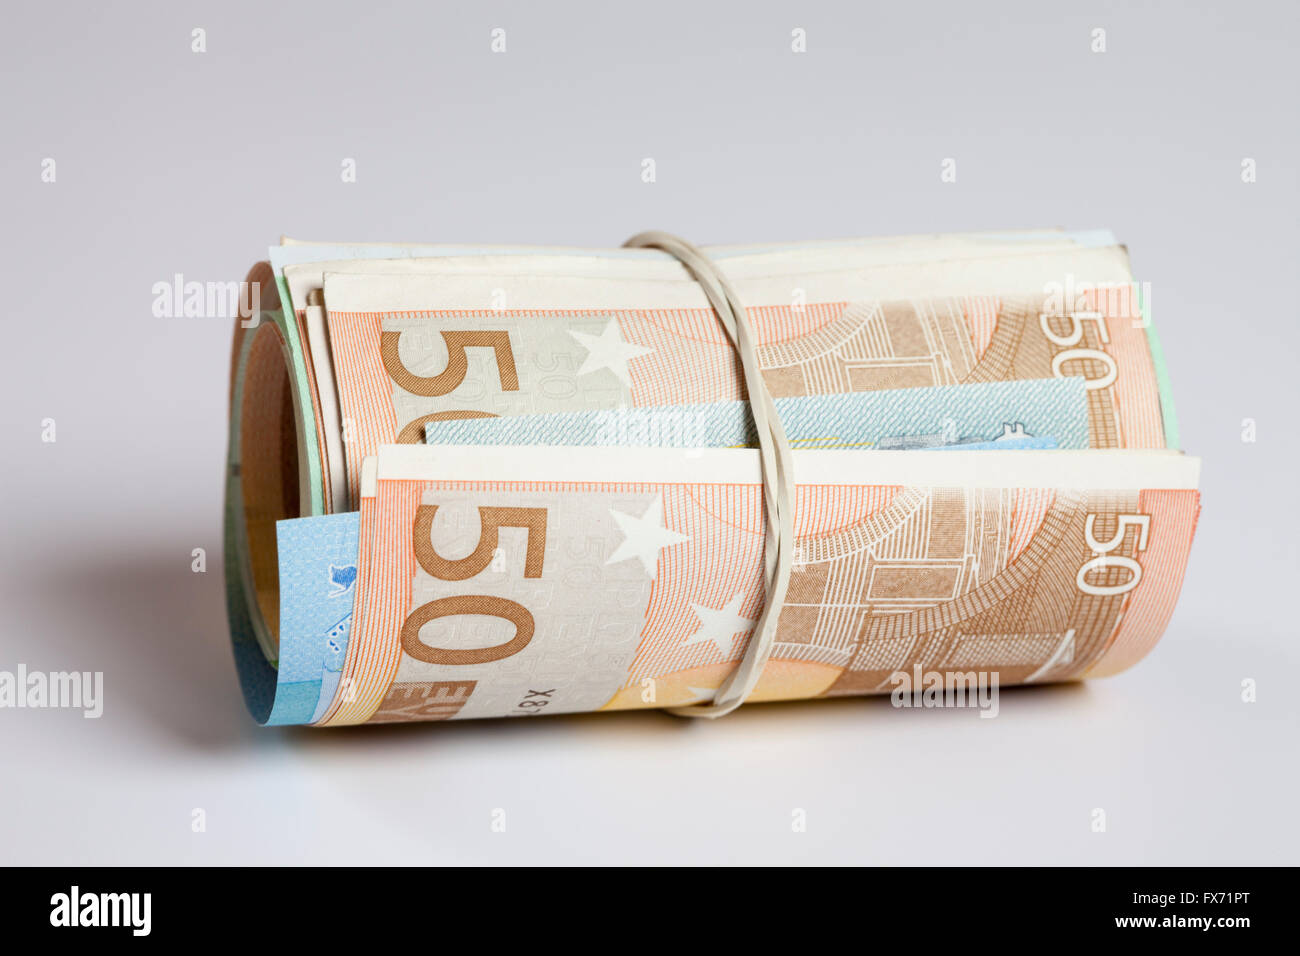 Roll of money with rubber band, multiple bank notes, Euros Stock Photo